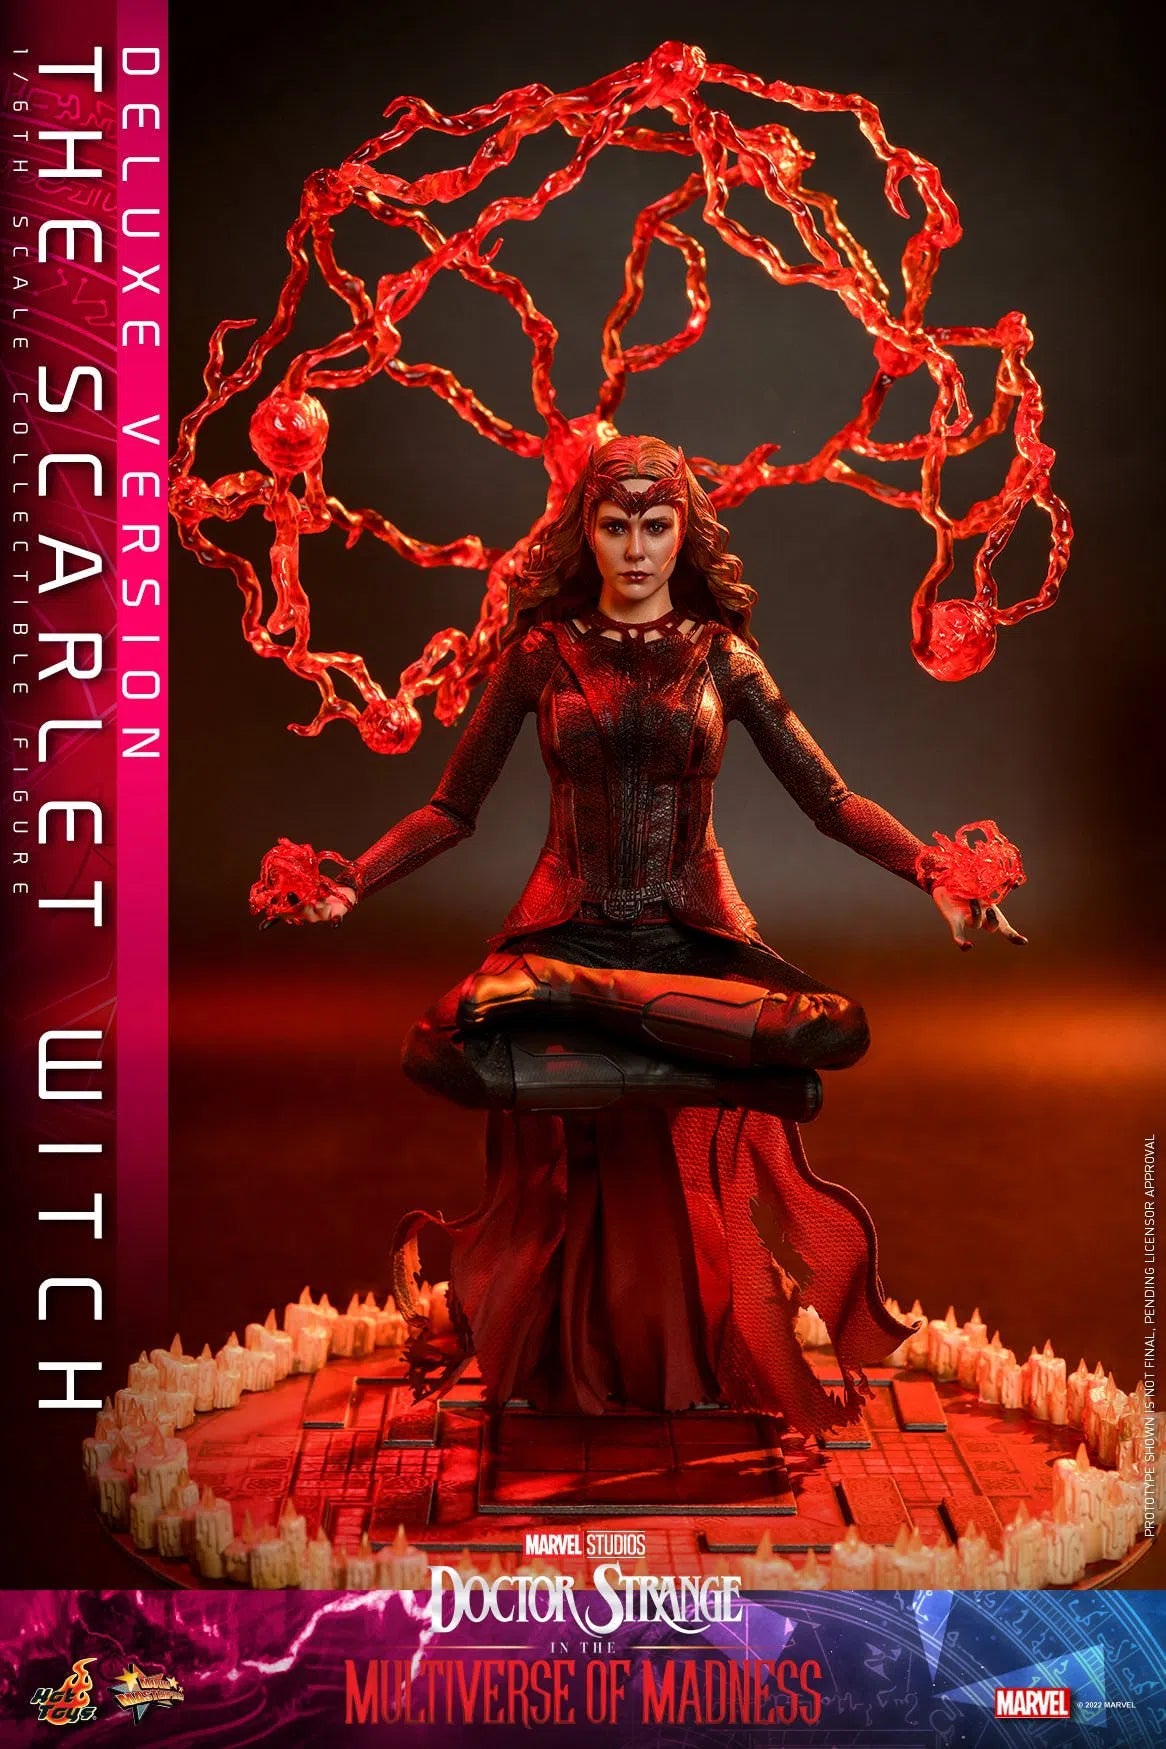 The Scarlet Witch: Deluxe: Multiverse Of Madness: Marvel: MMS653: Hot Toys: Hot Toys